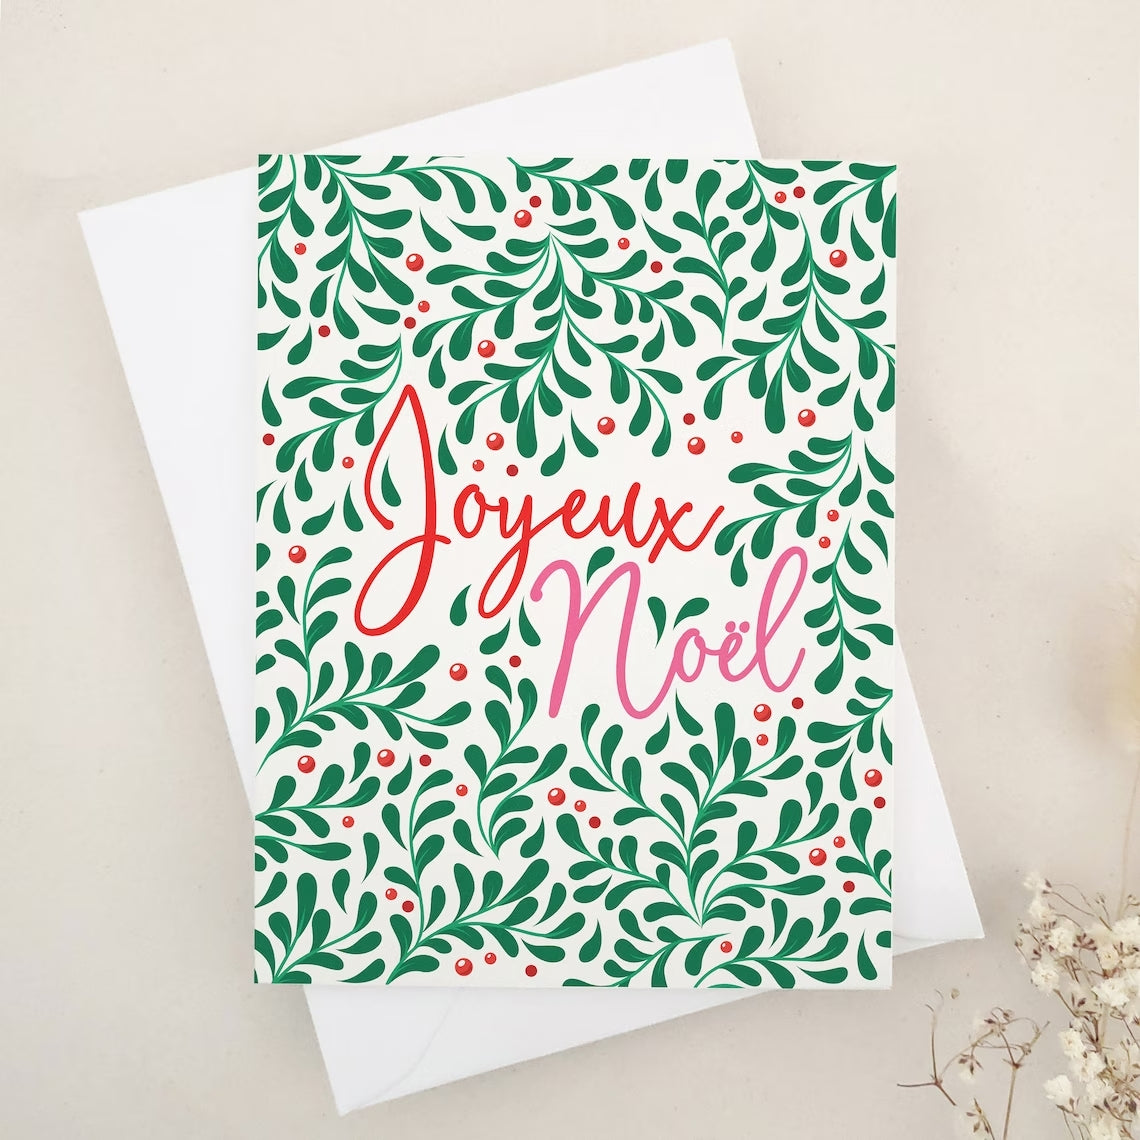 Festive 'Joyeux Noël' Holiday Card with Green and Red Botanical Design